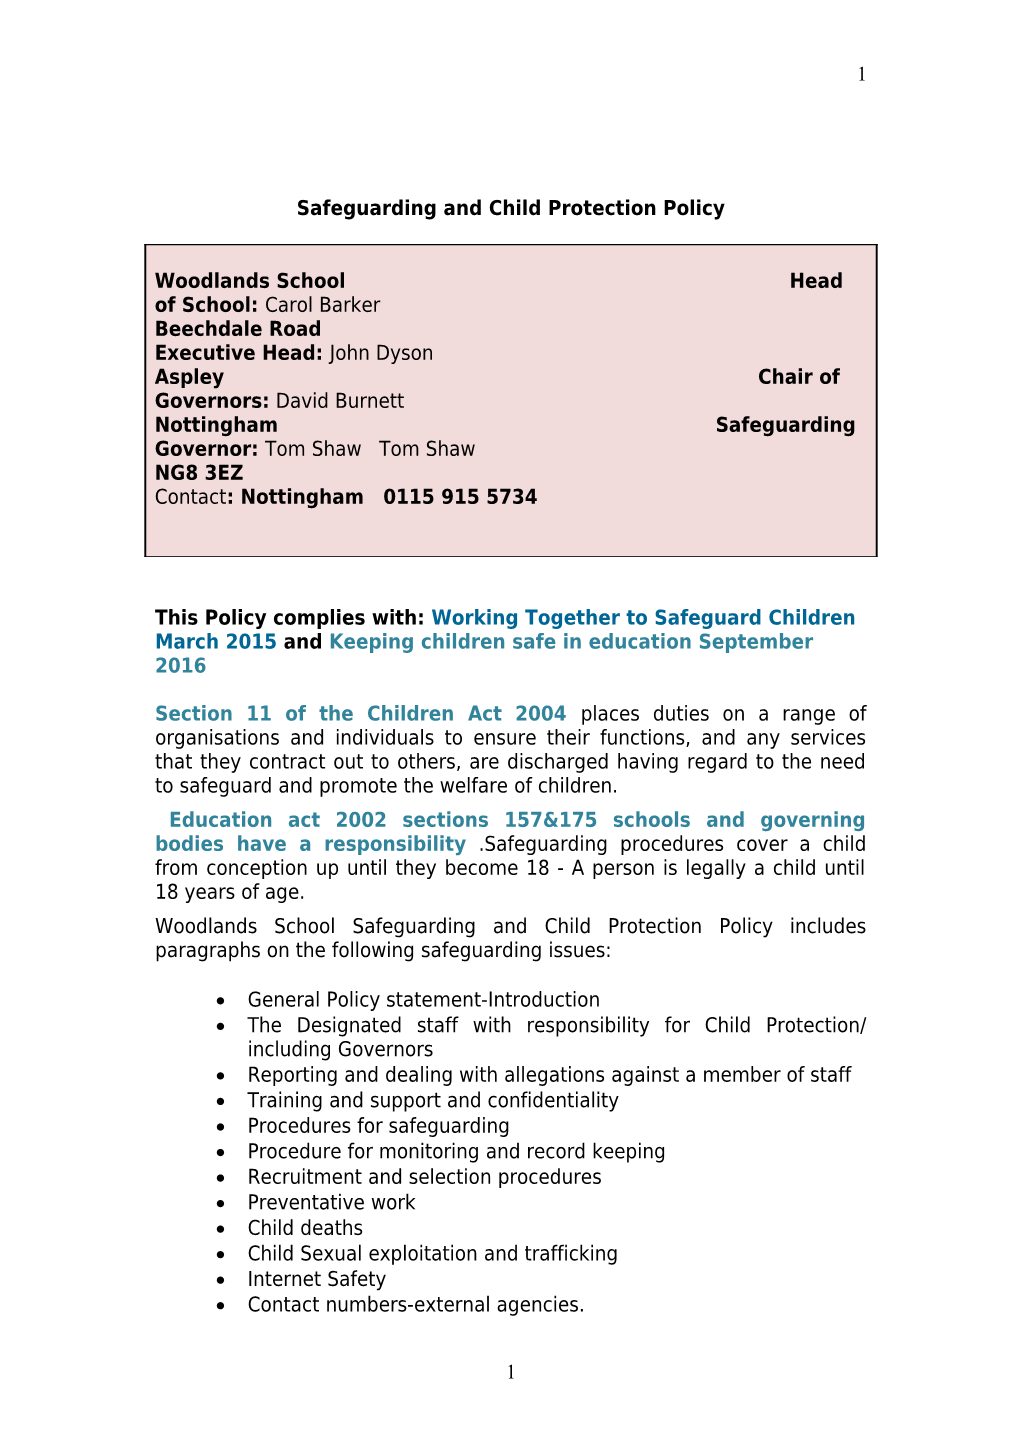 Woodlands School: Safeguarding And Child Protection Policy